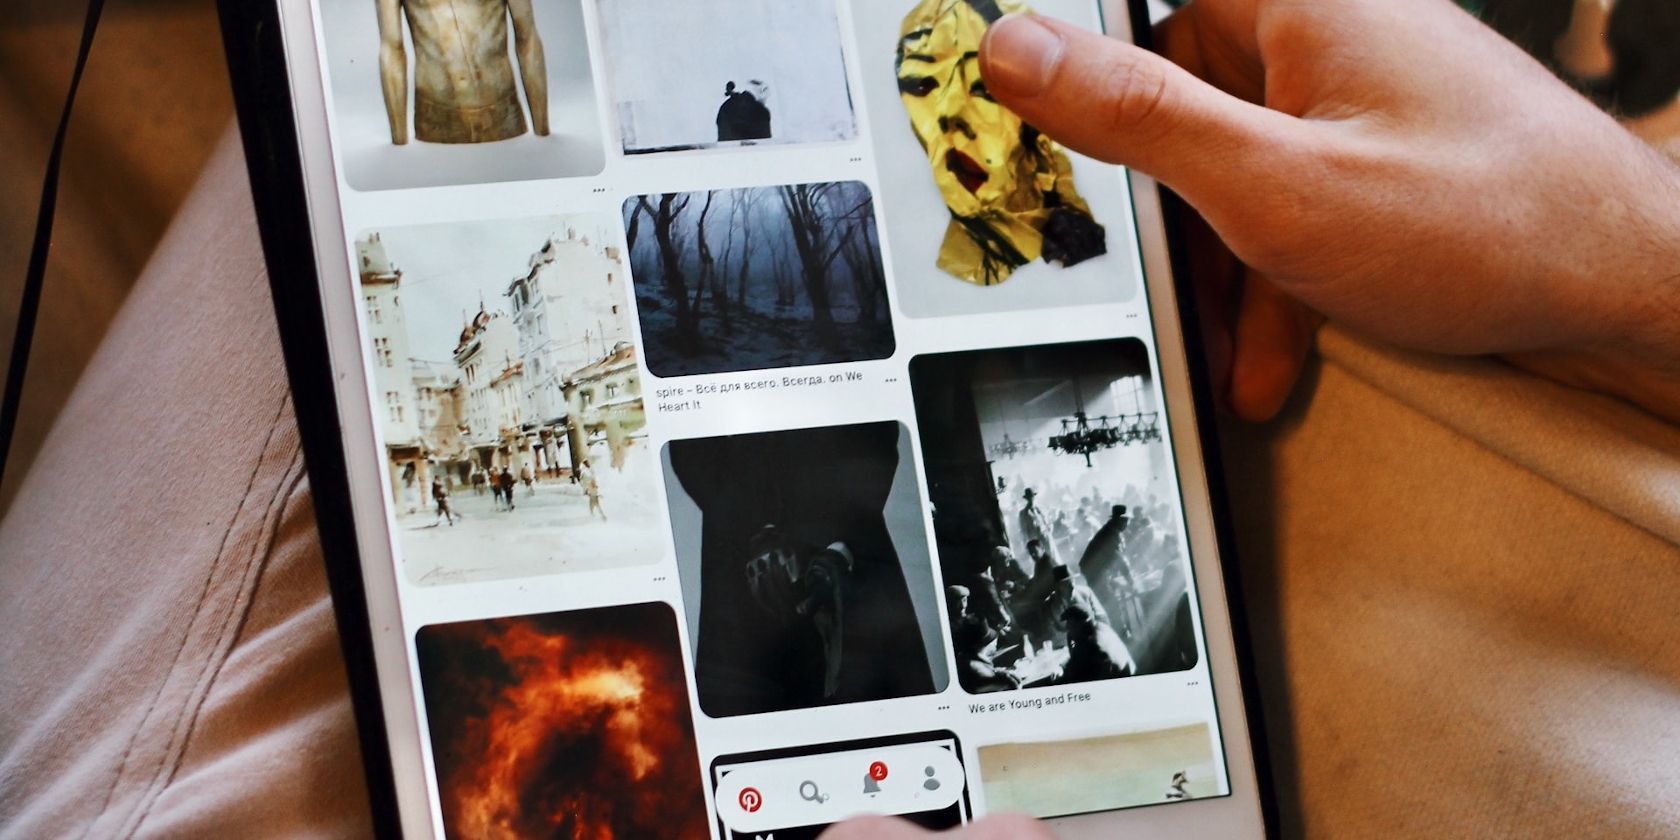 Pinterest Home Feed on Tablet